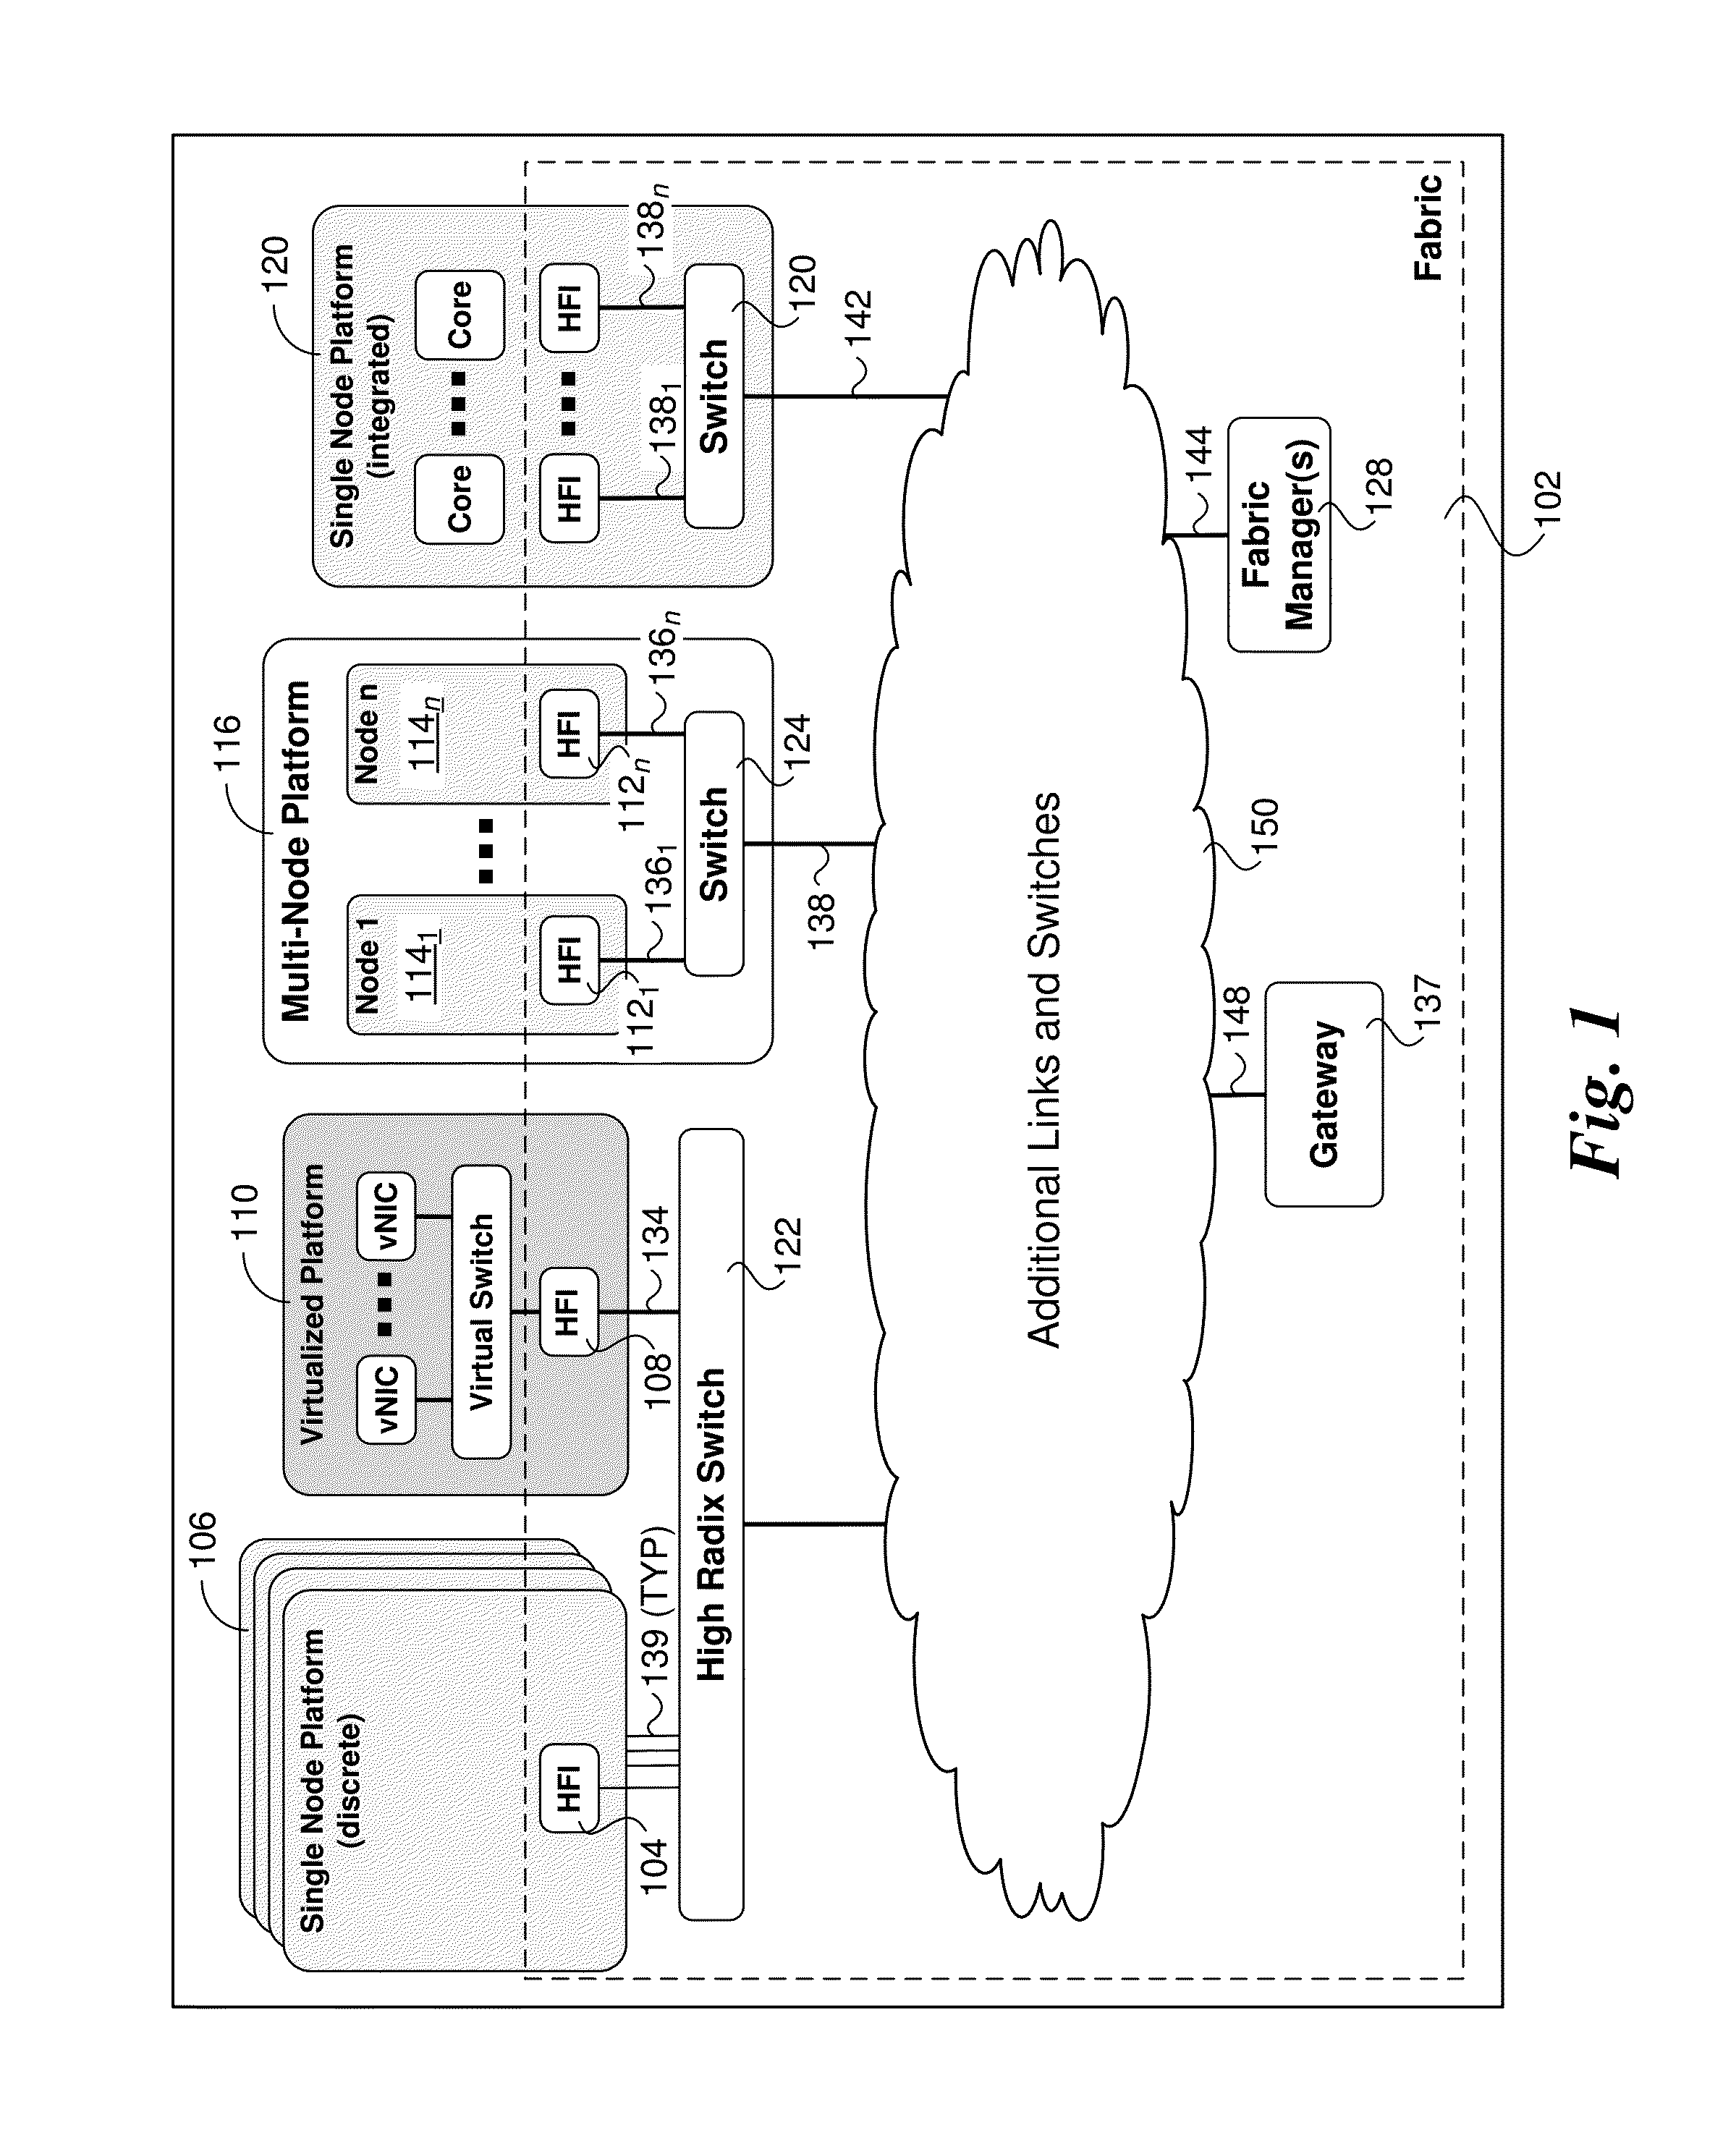 Method, apparatus and system for QOS within high performance fabrics